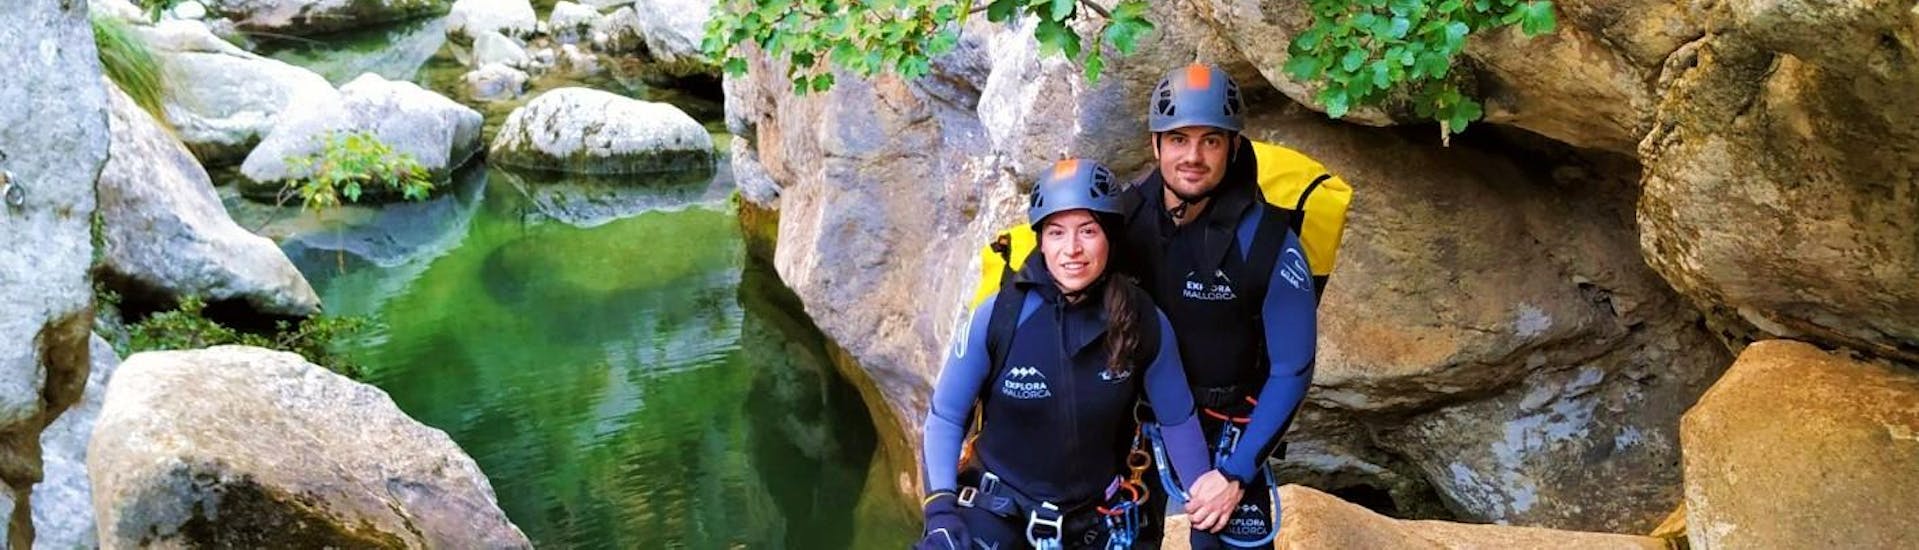 Canyoning in Mallorca für Anfänger.